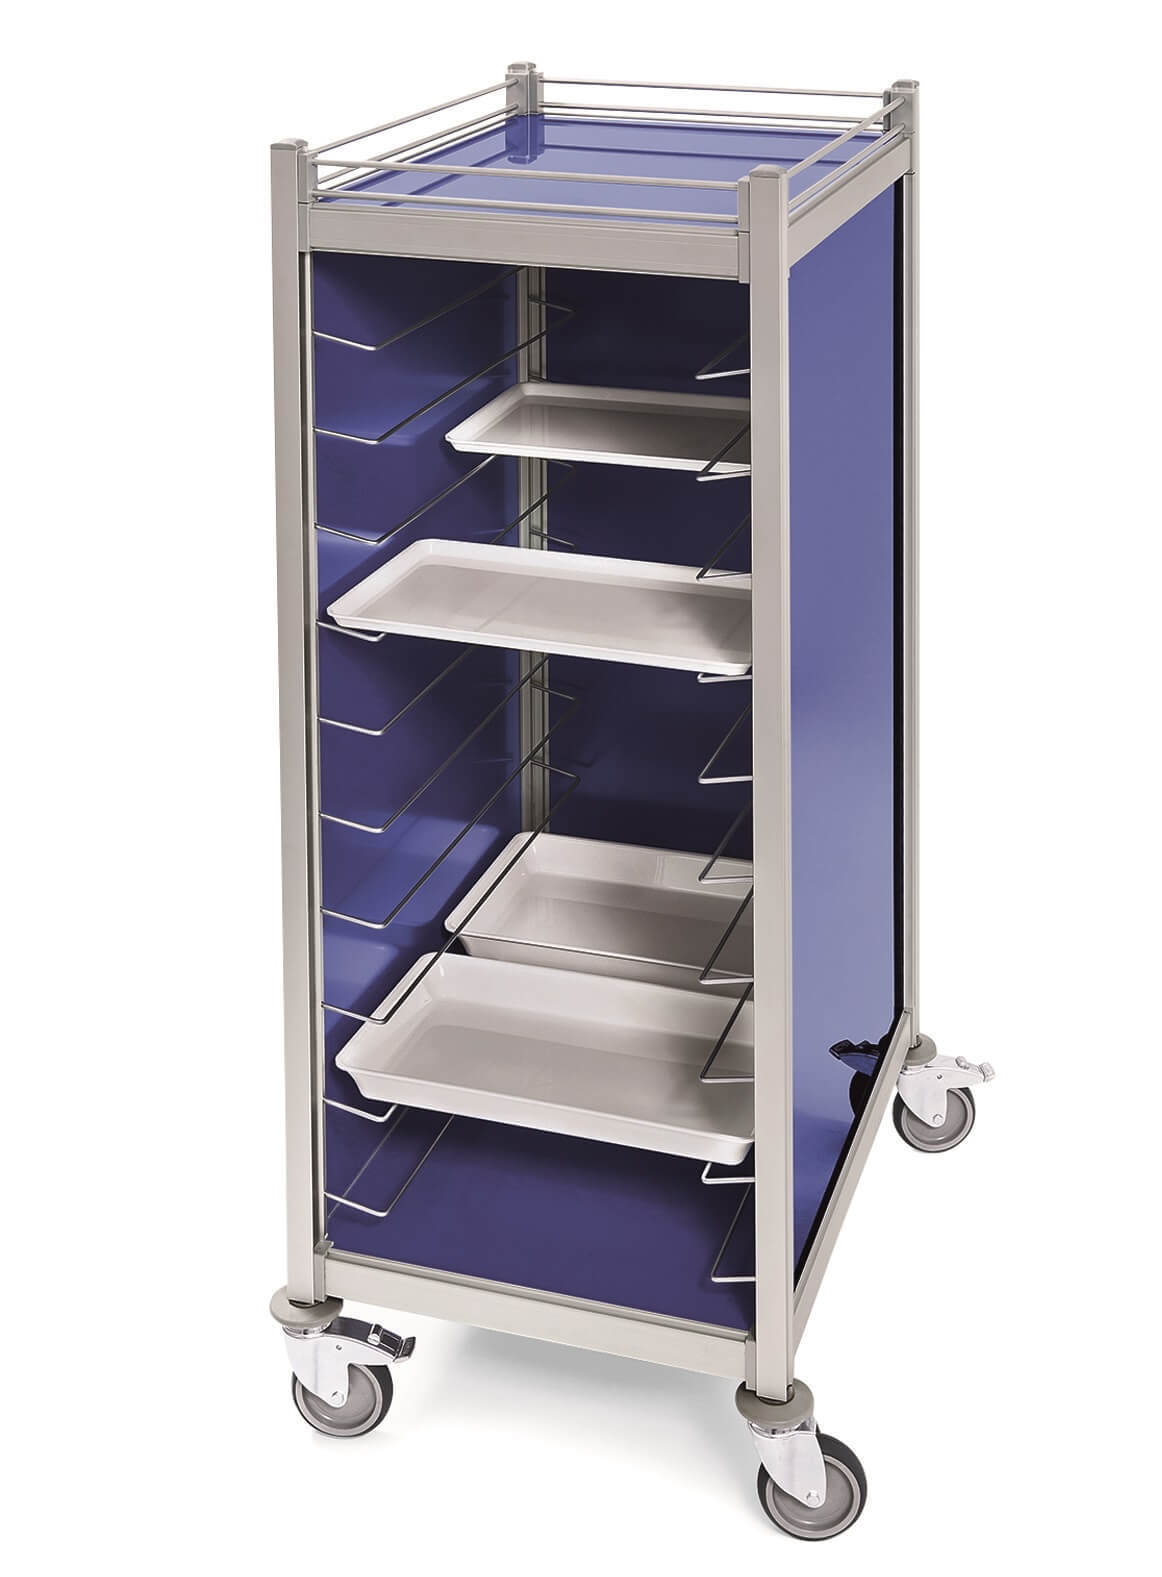 Aluminum trolley with a back wall and a top shelf